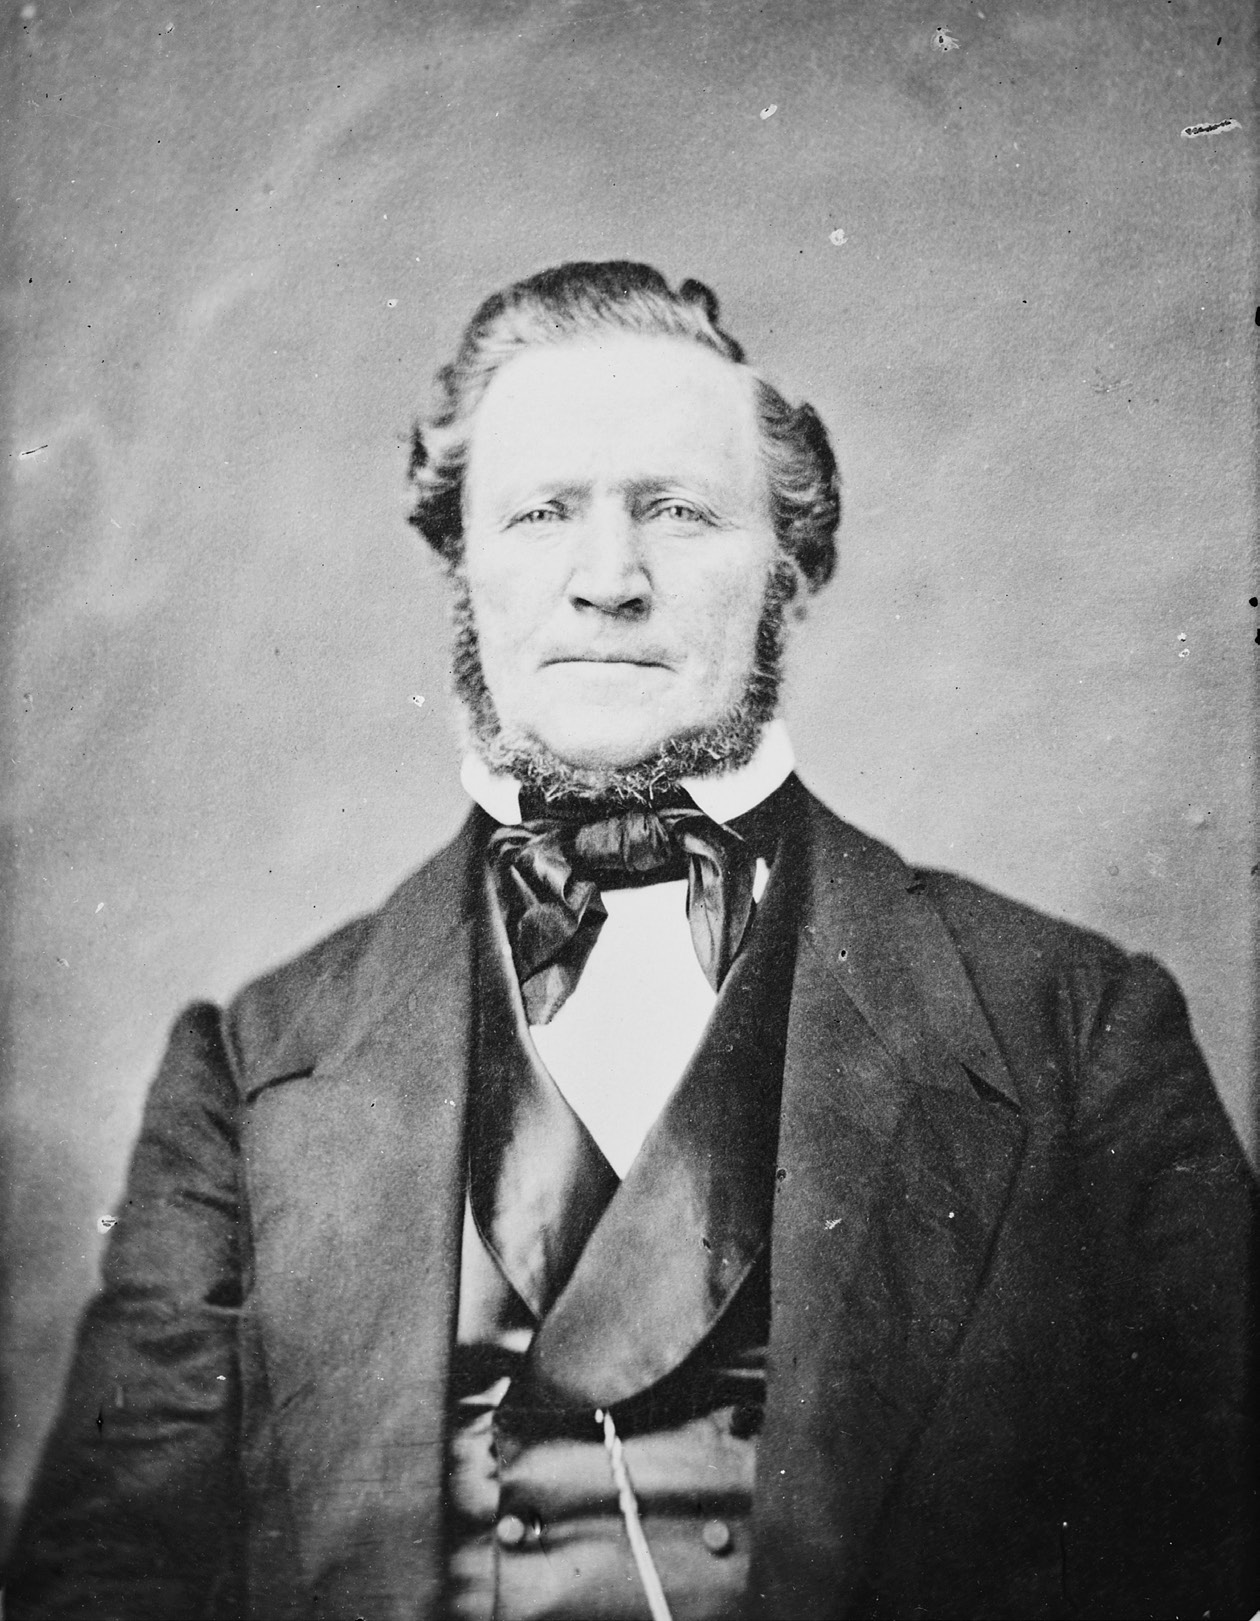 Brigham Young. Prints and Photographs Division, Library of Congress, LC-DIG-cwpbh-01671.